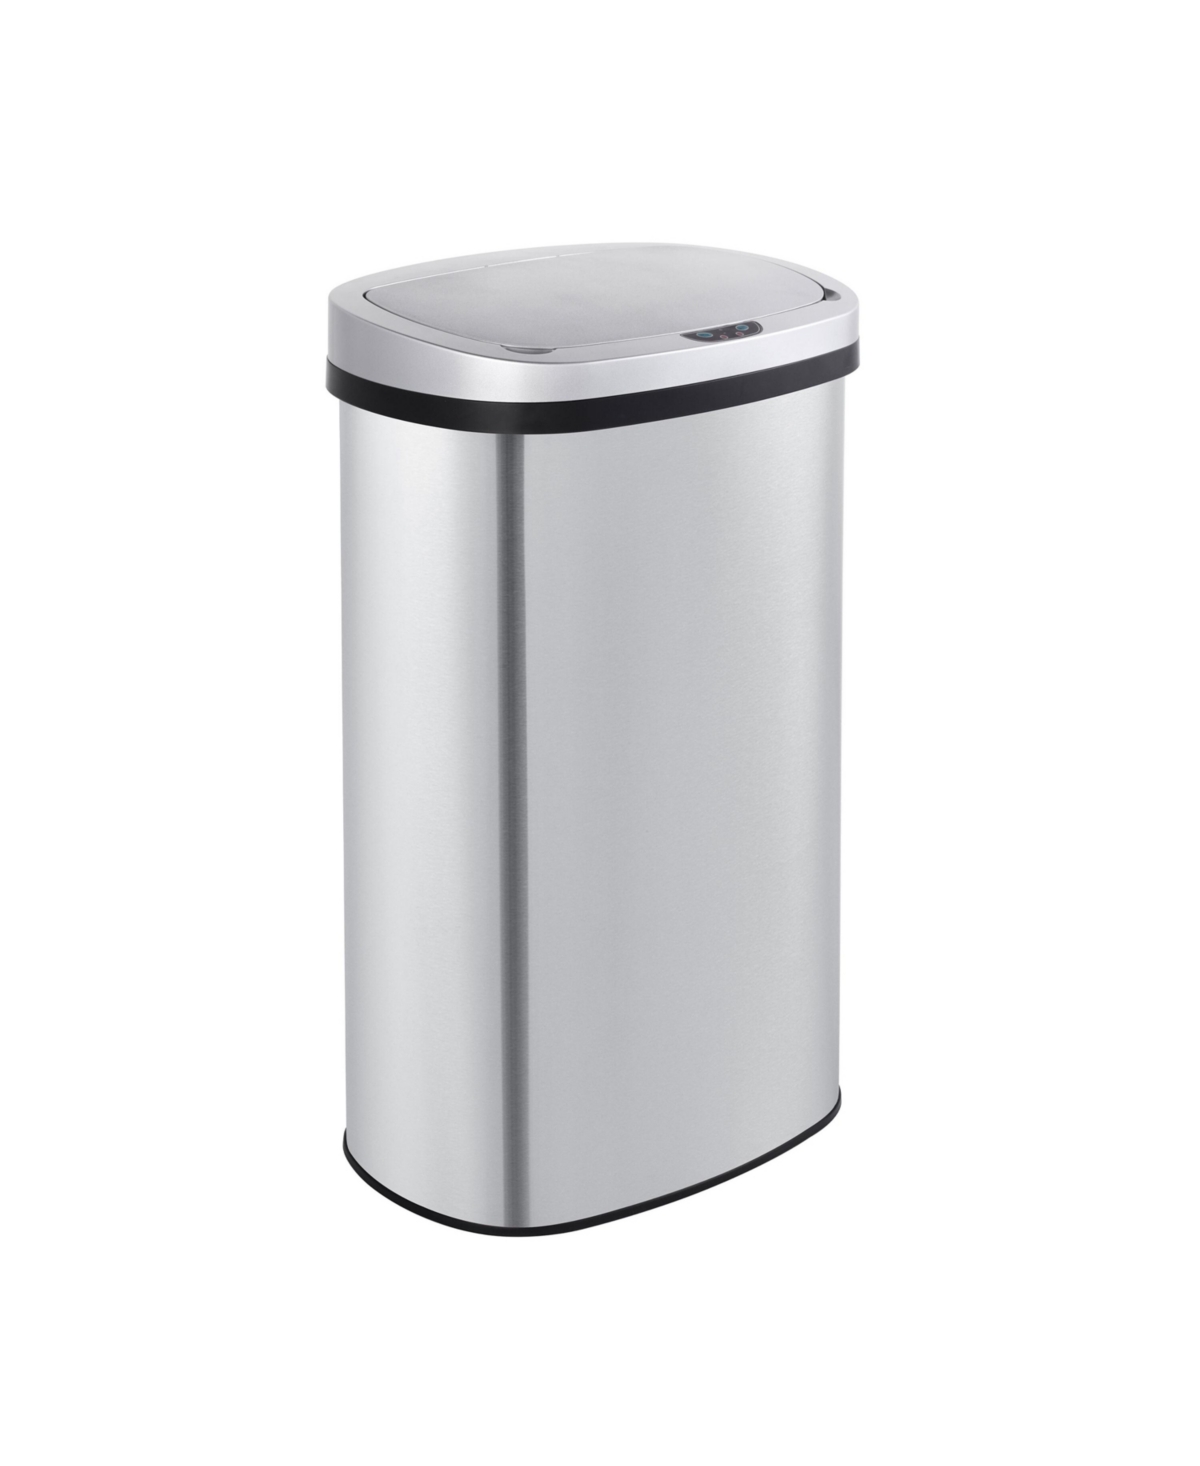 15.85 Gal./60 Liter Stainless Steel Oval Motion Sensor Trash Can for Kitchen - Silver